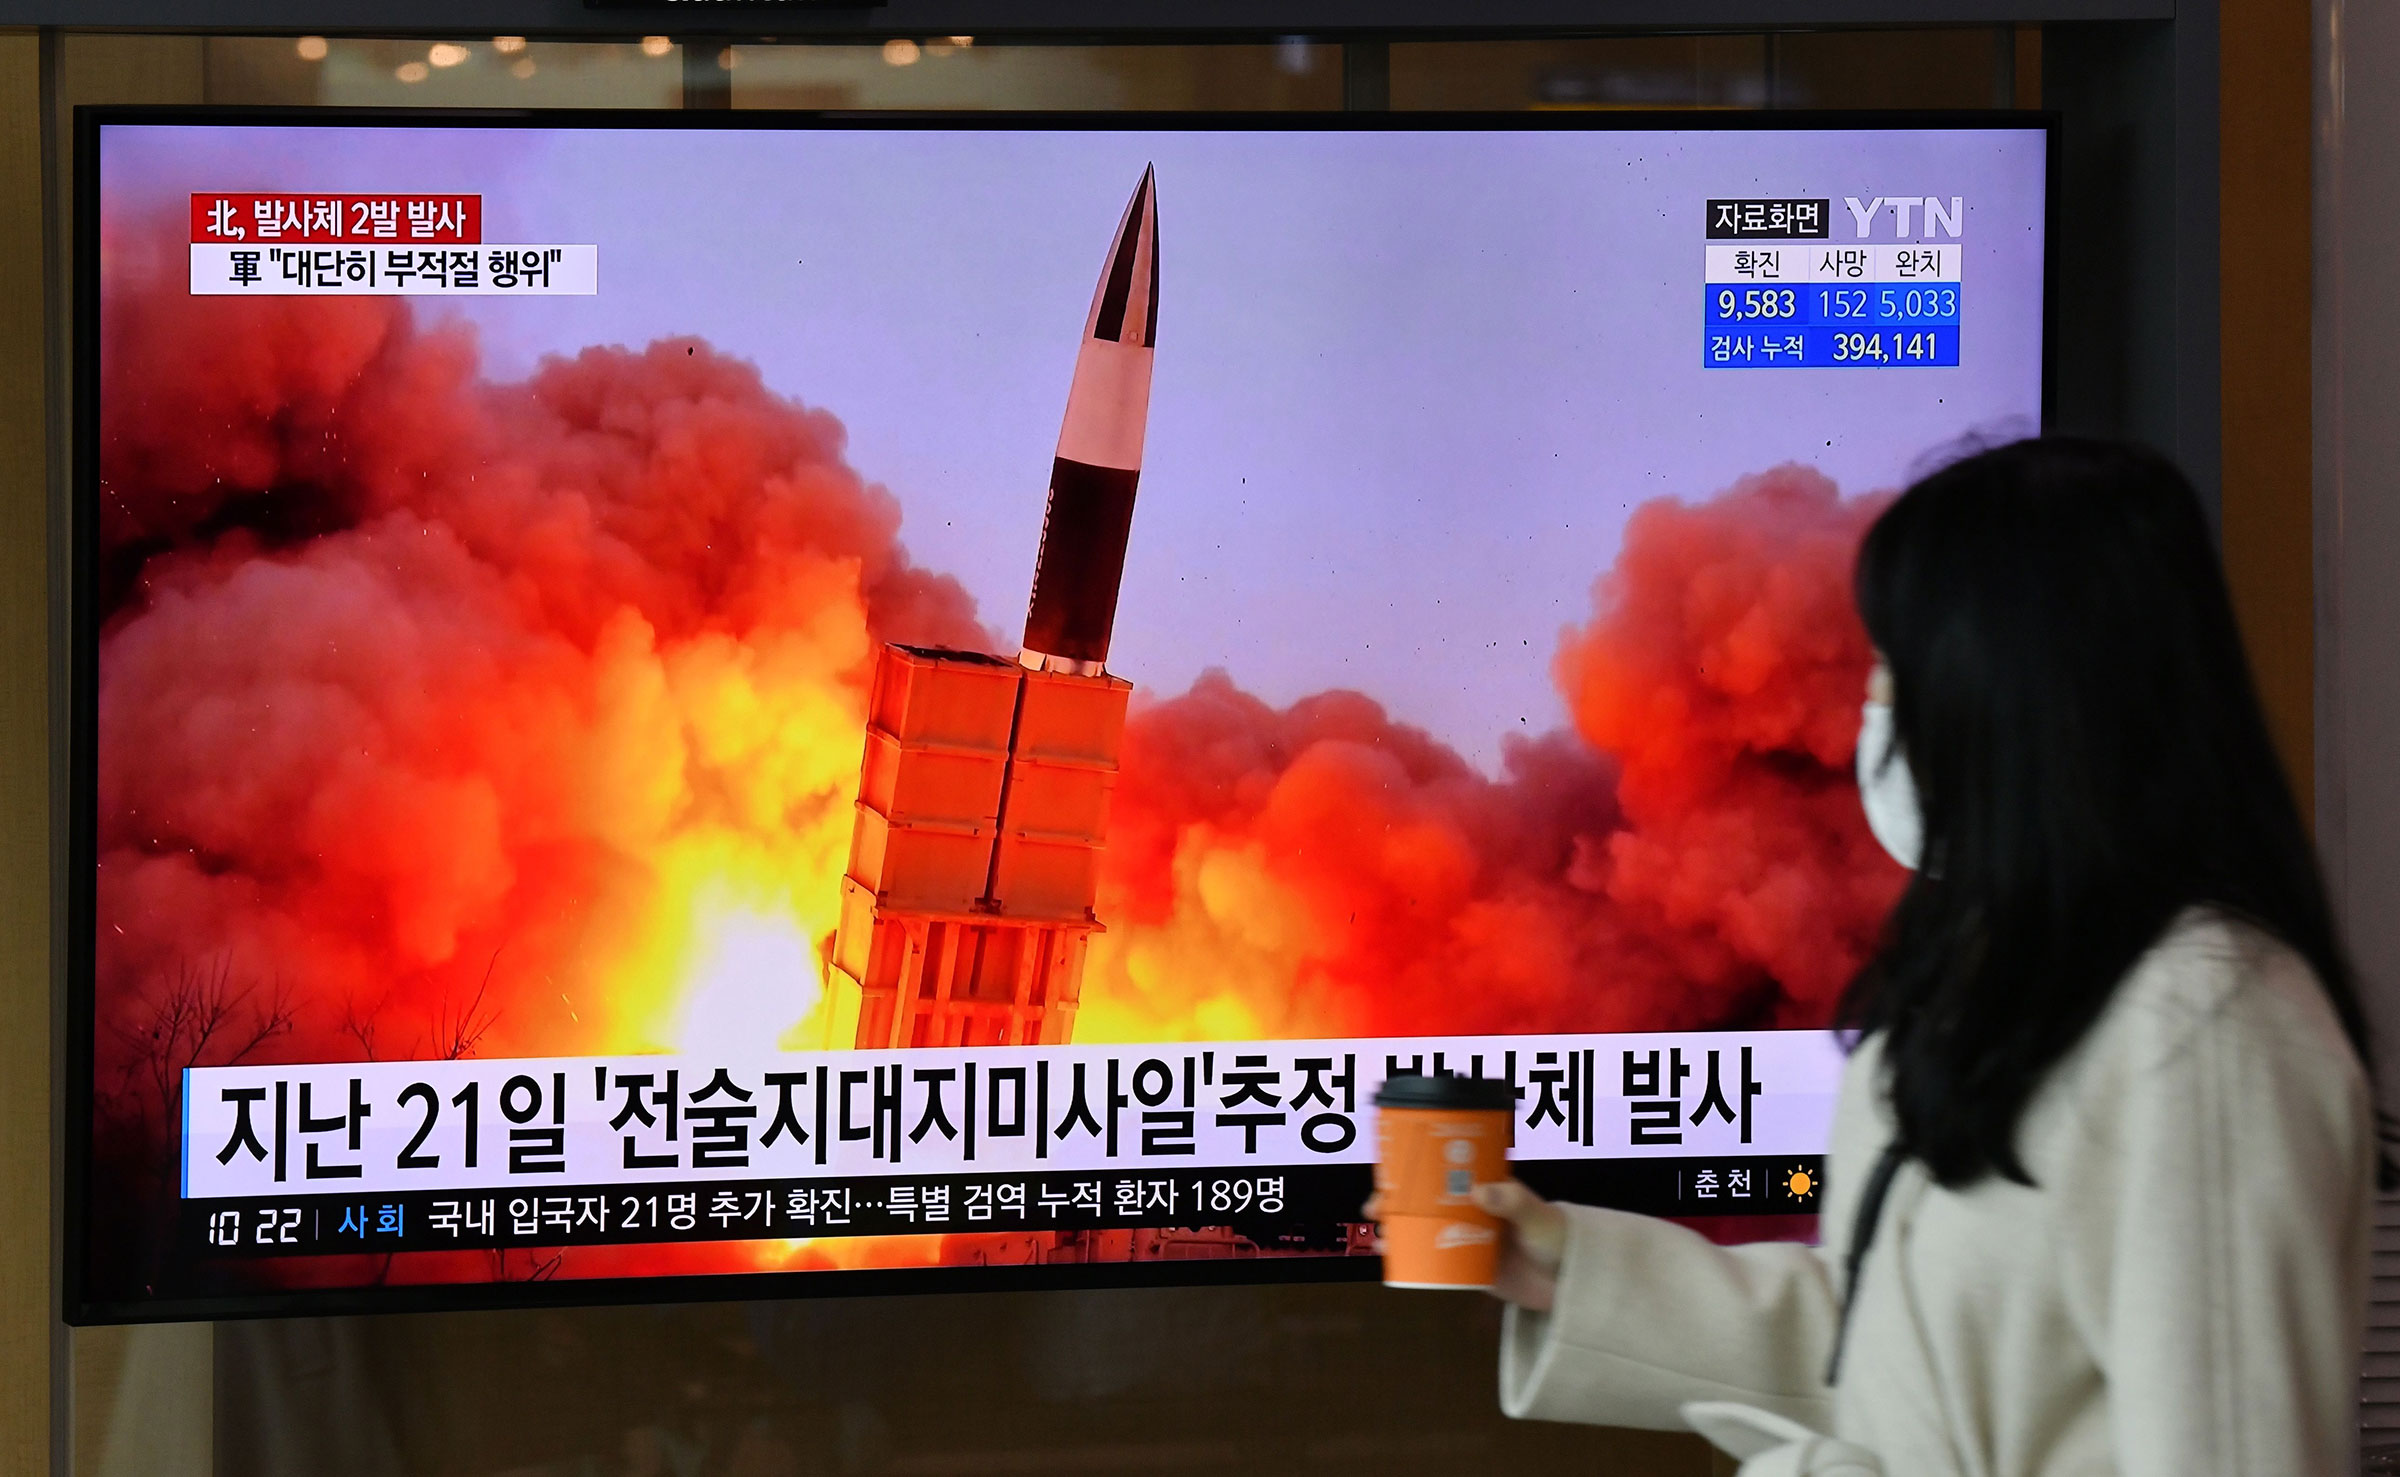 A woman walks past a screen showing file footage of a North Korean missile test, at a railway station in Seoul on March 29